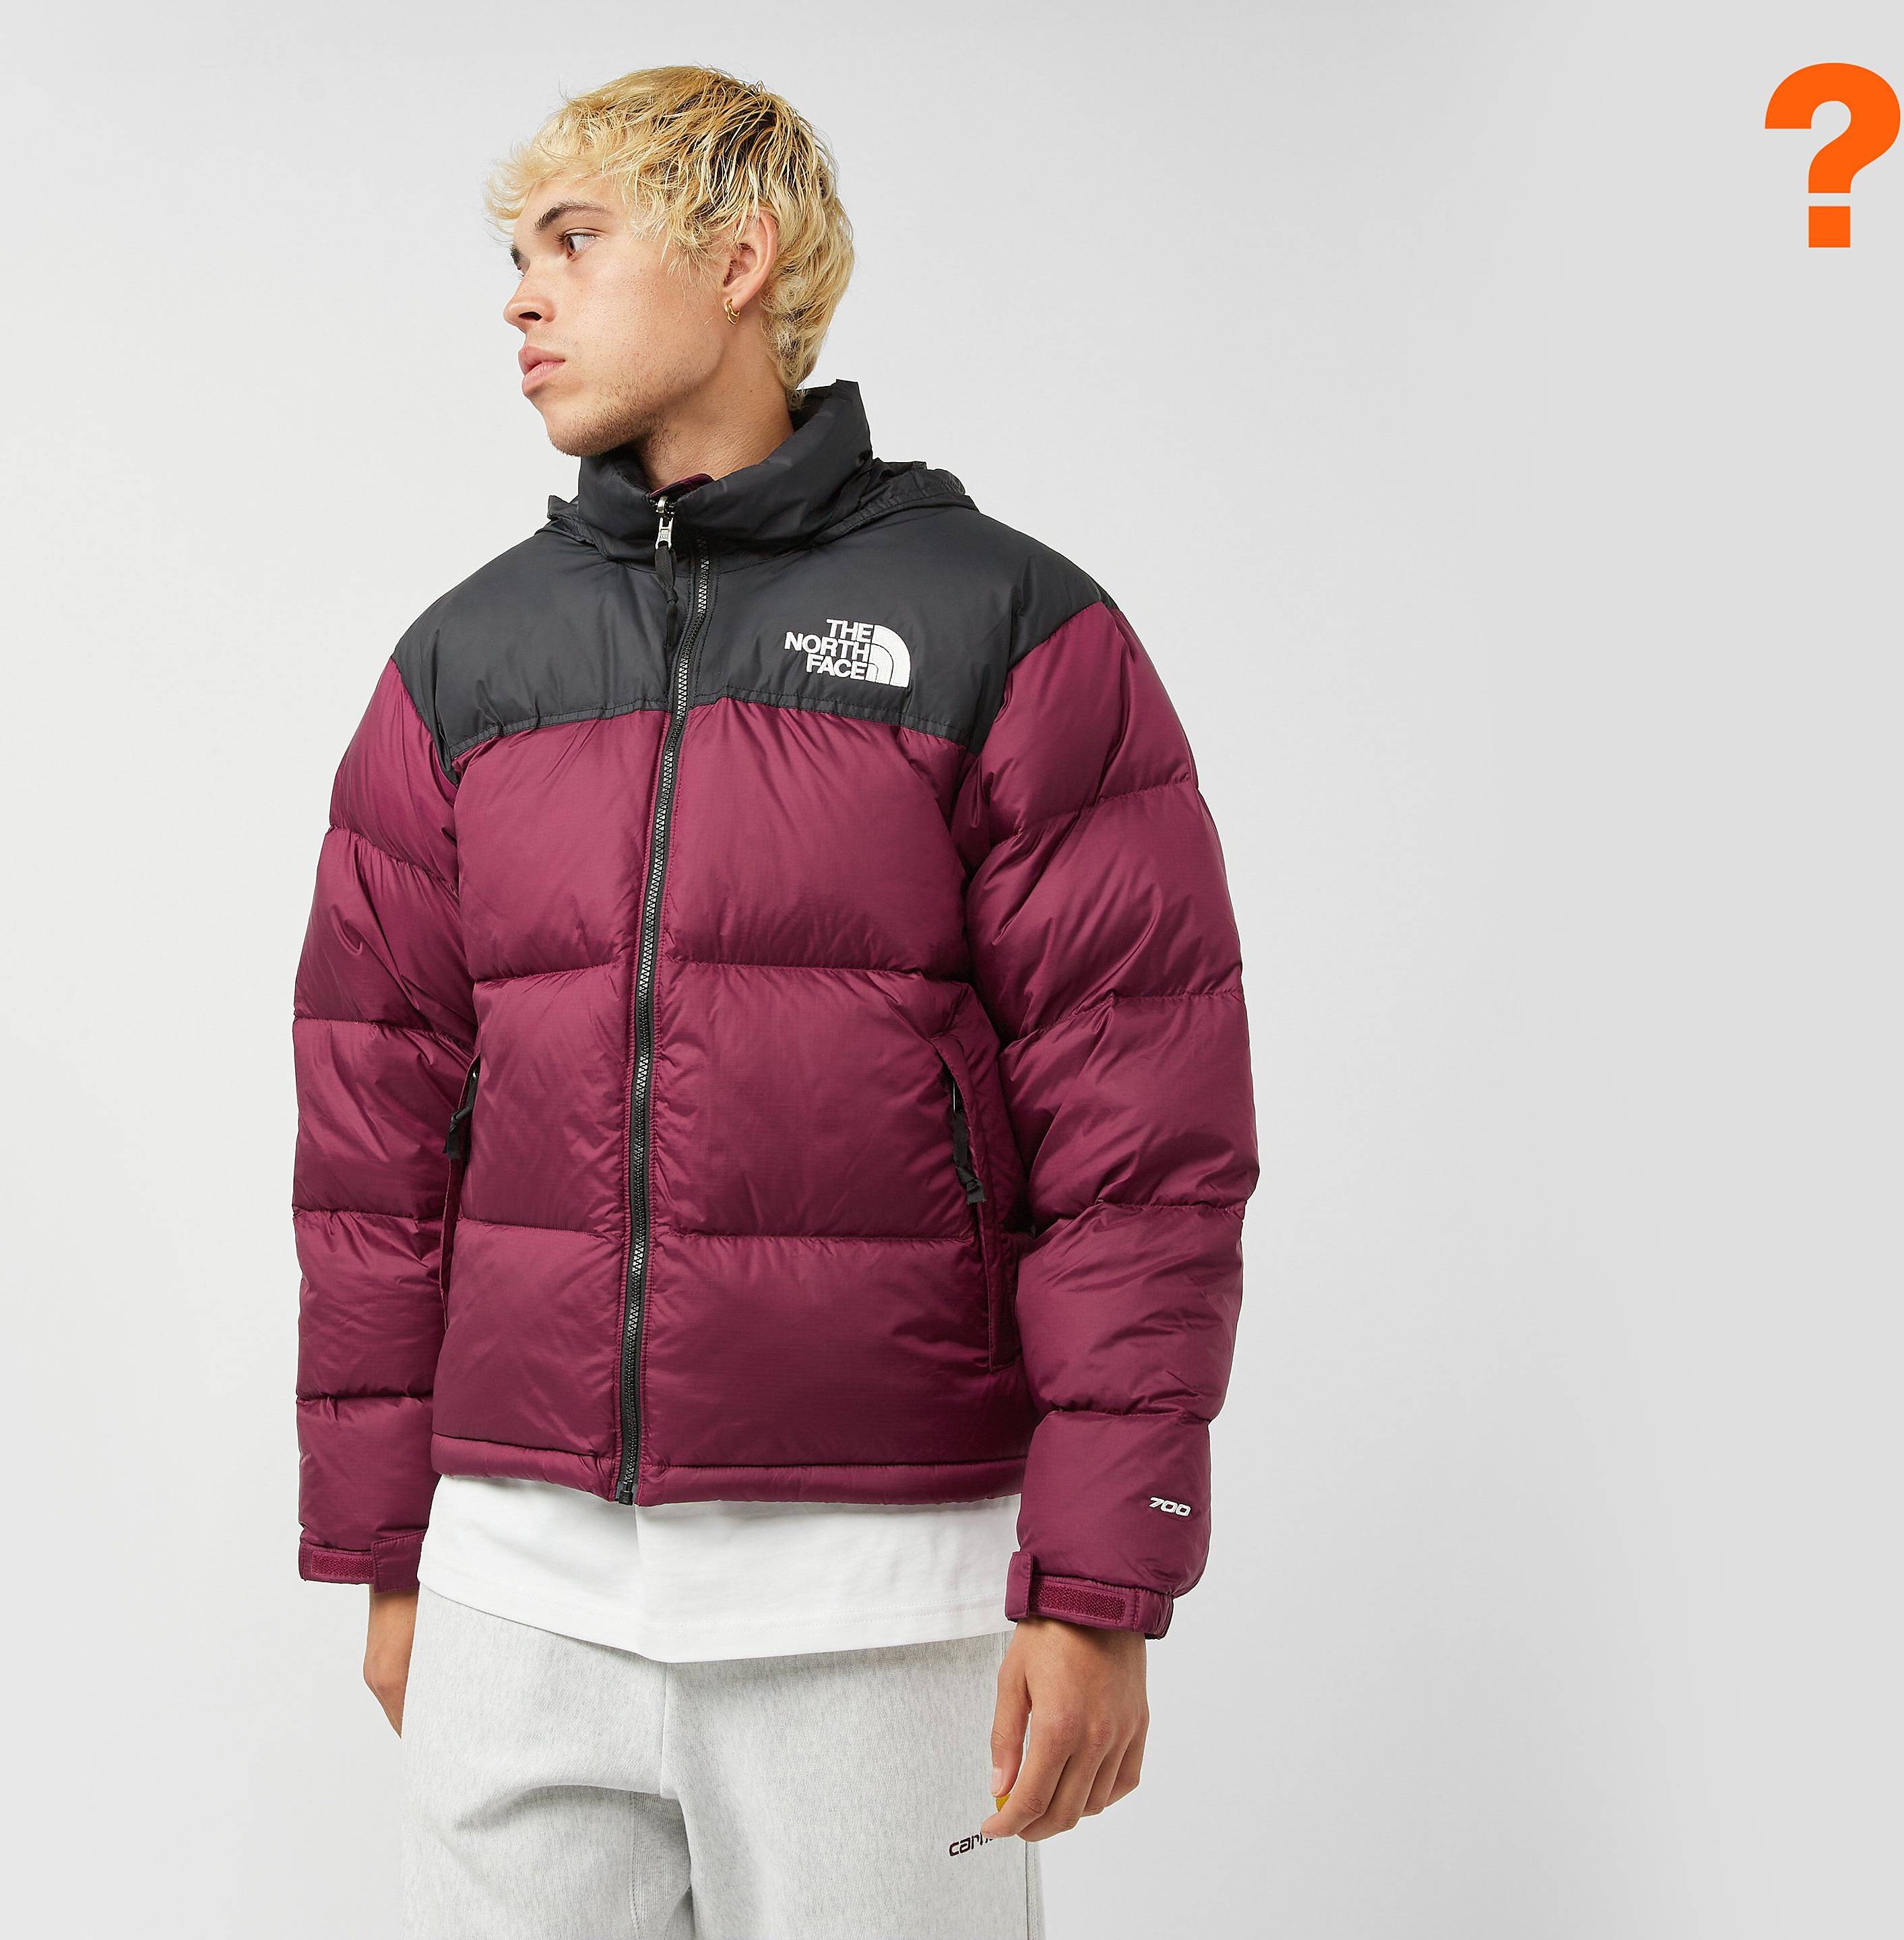 The north face nuptse jacket • Compare best prices